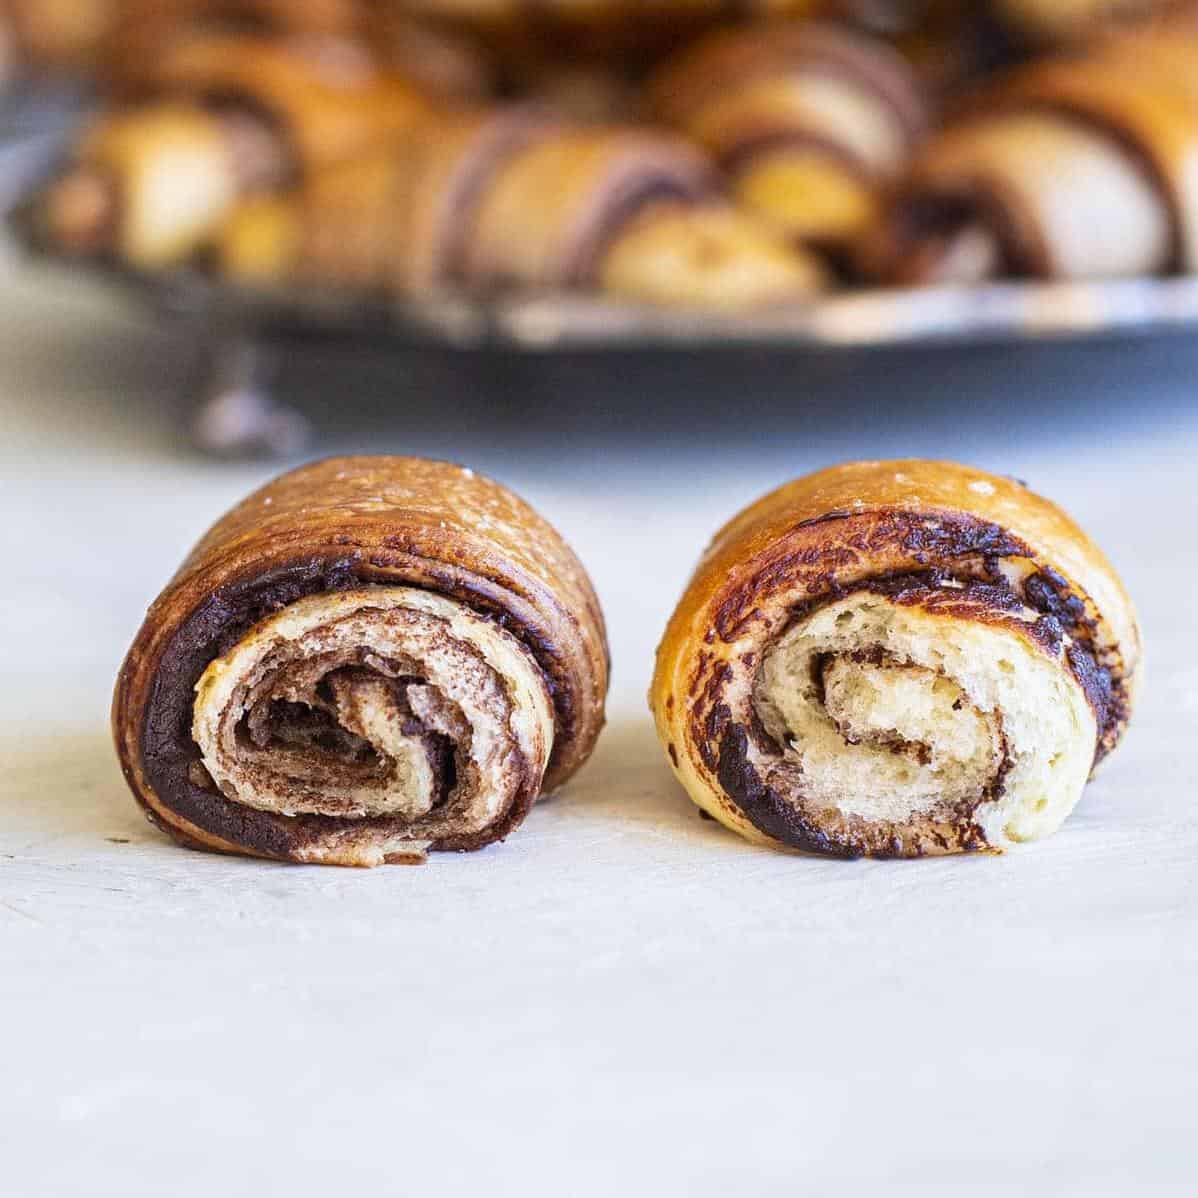  Serve up these vegan rugelach at your next gathering and watch them disappear in seconds.